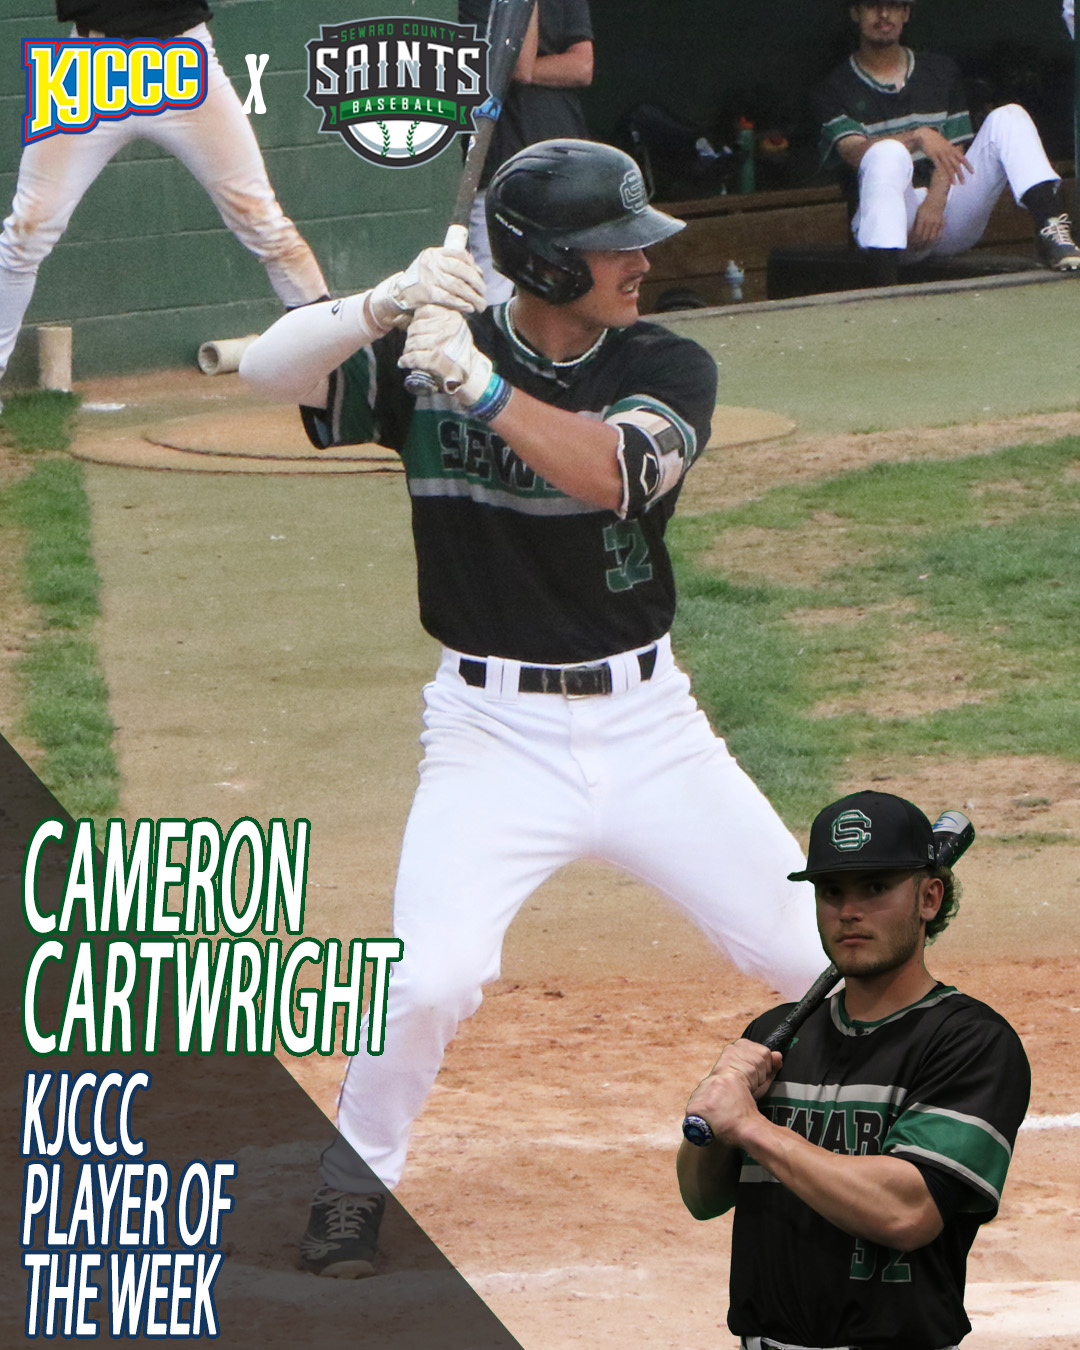 Cameron Cartwright is KJCCC Player of the Week